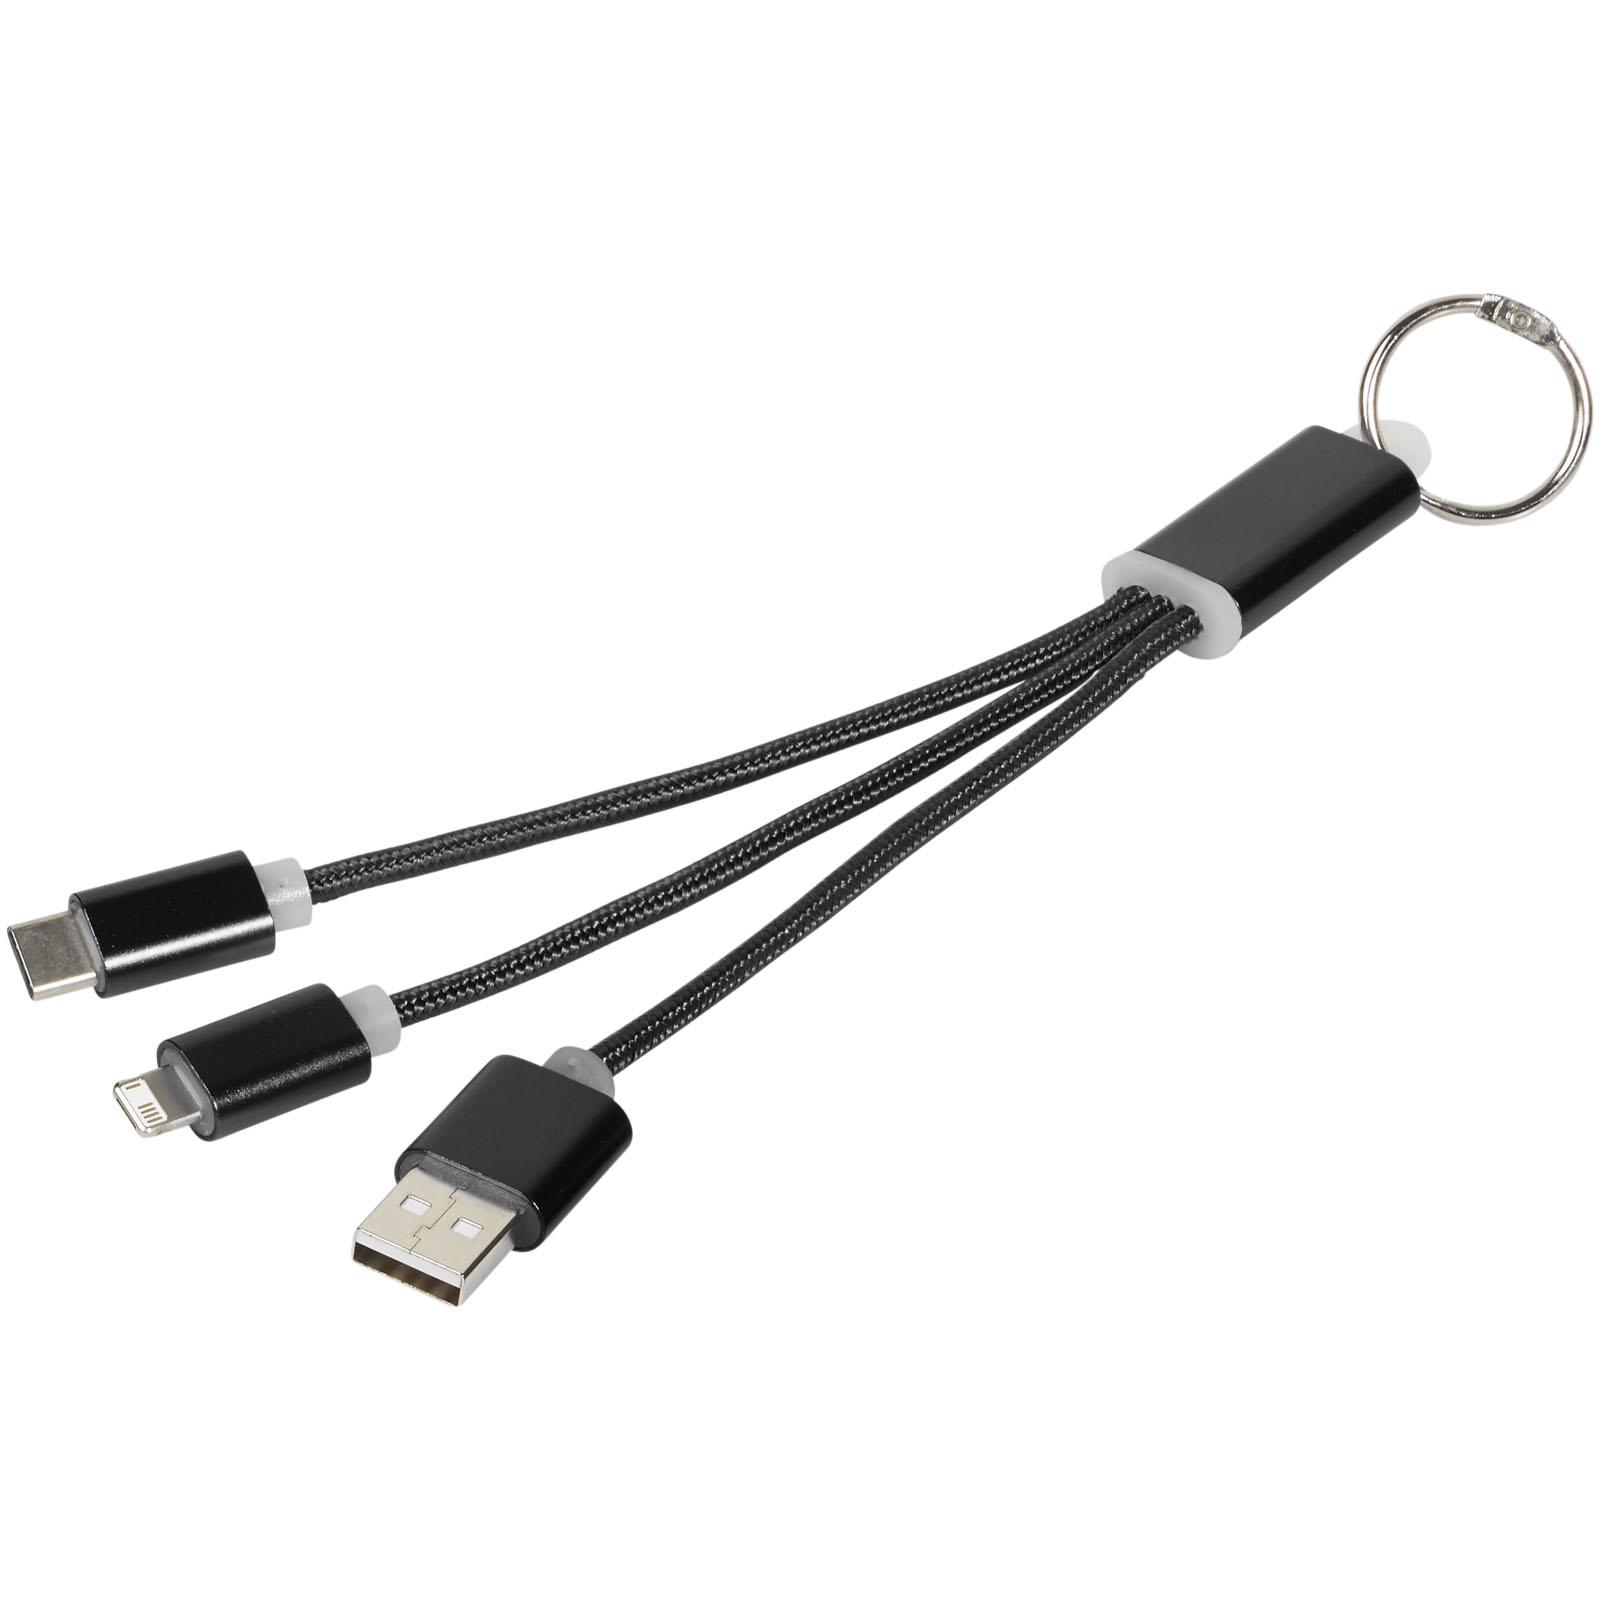 Stanton Metal 3-in-1 Charging Cable with Key-ring - Bury St Edmunds